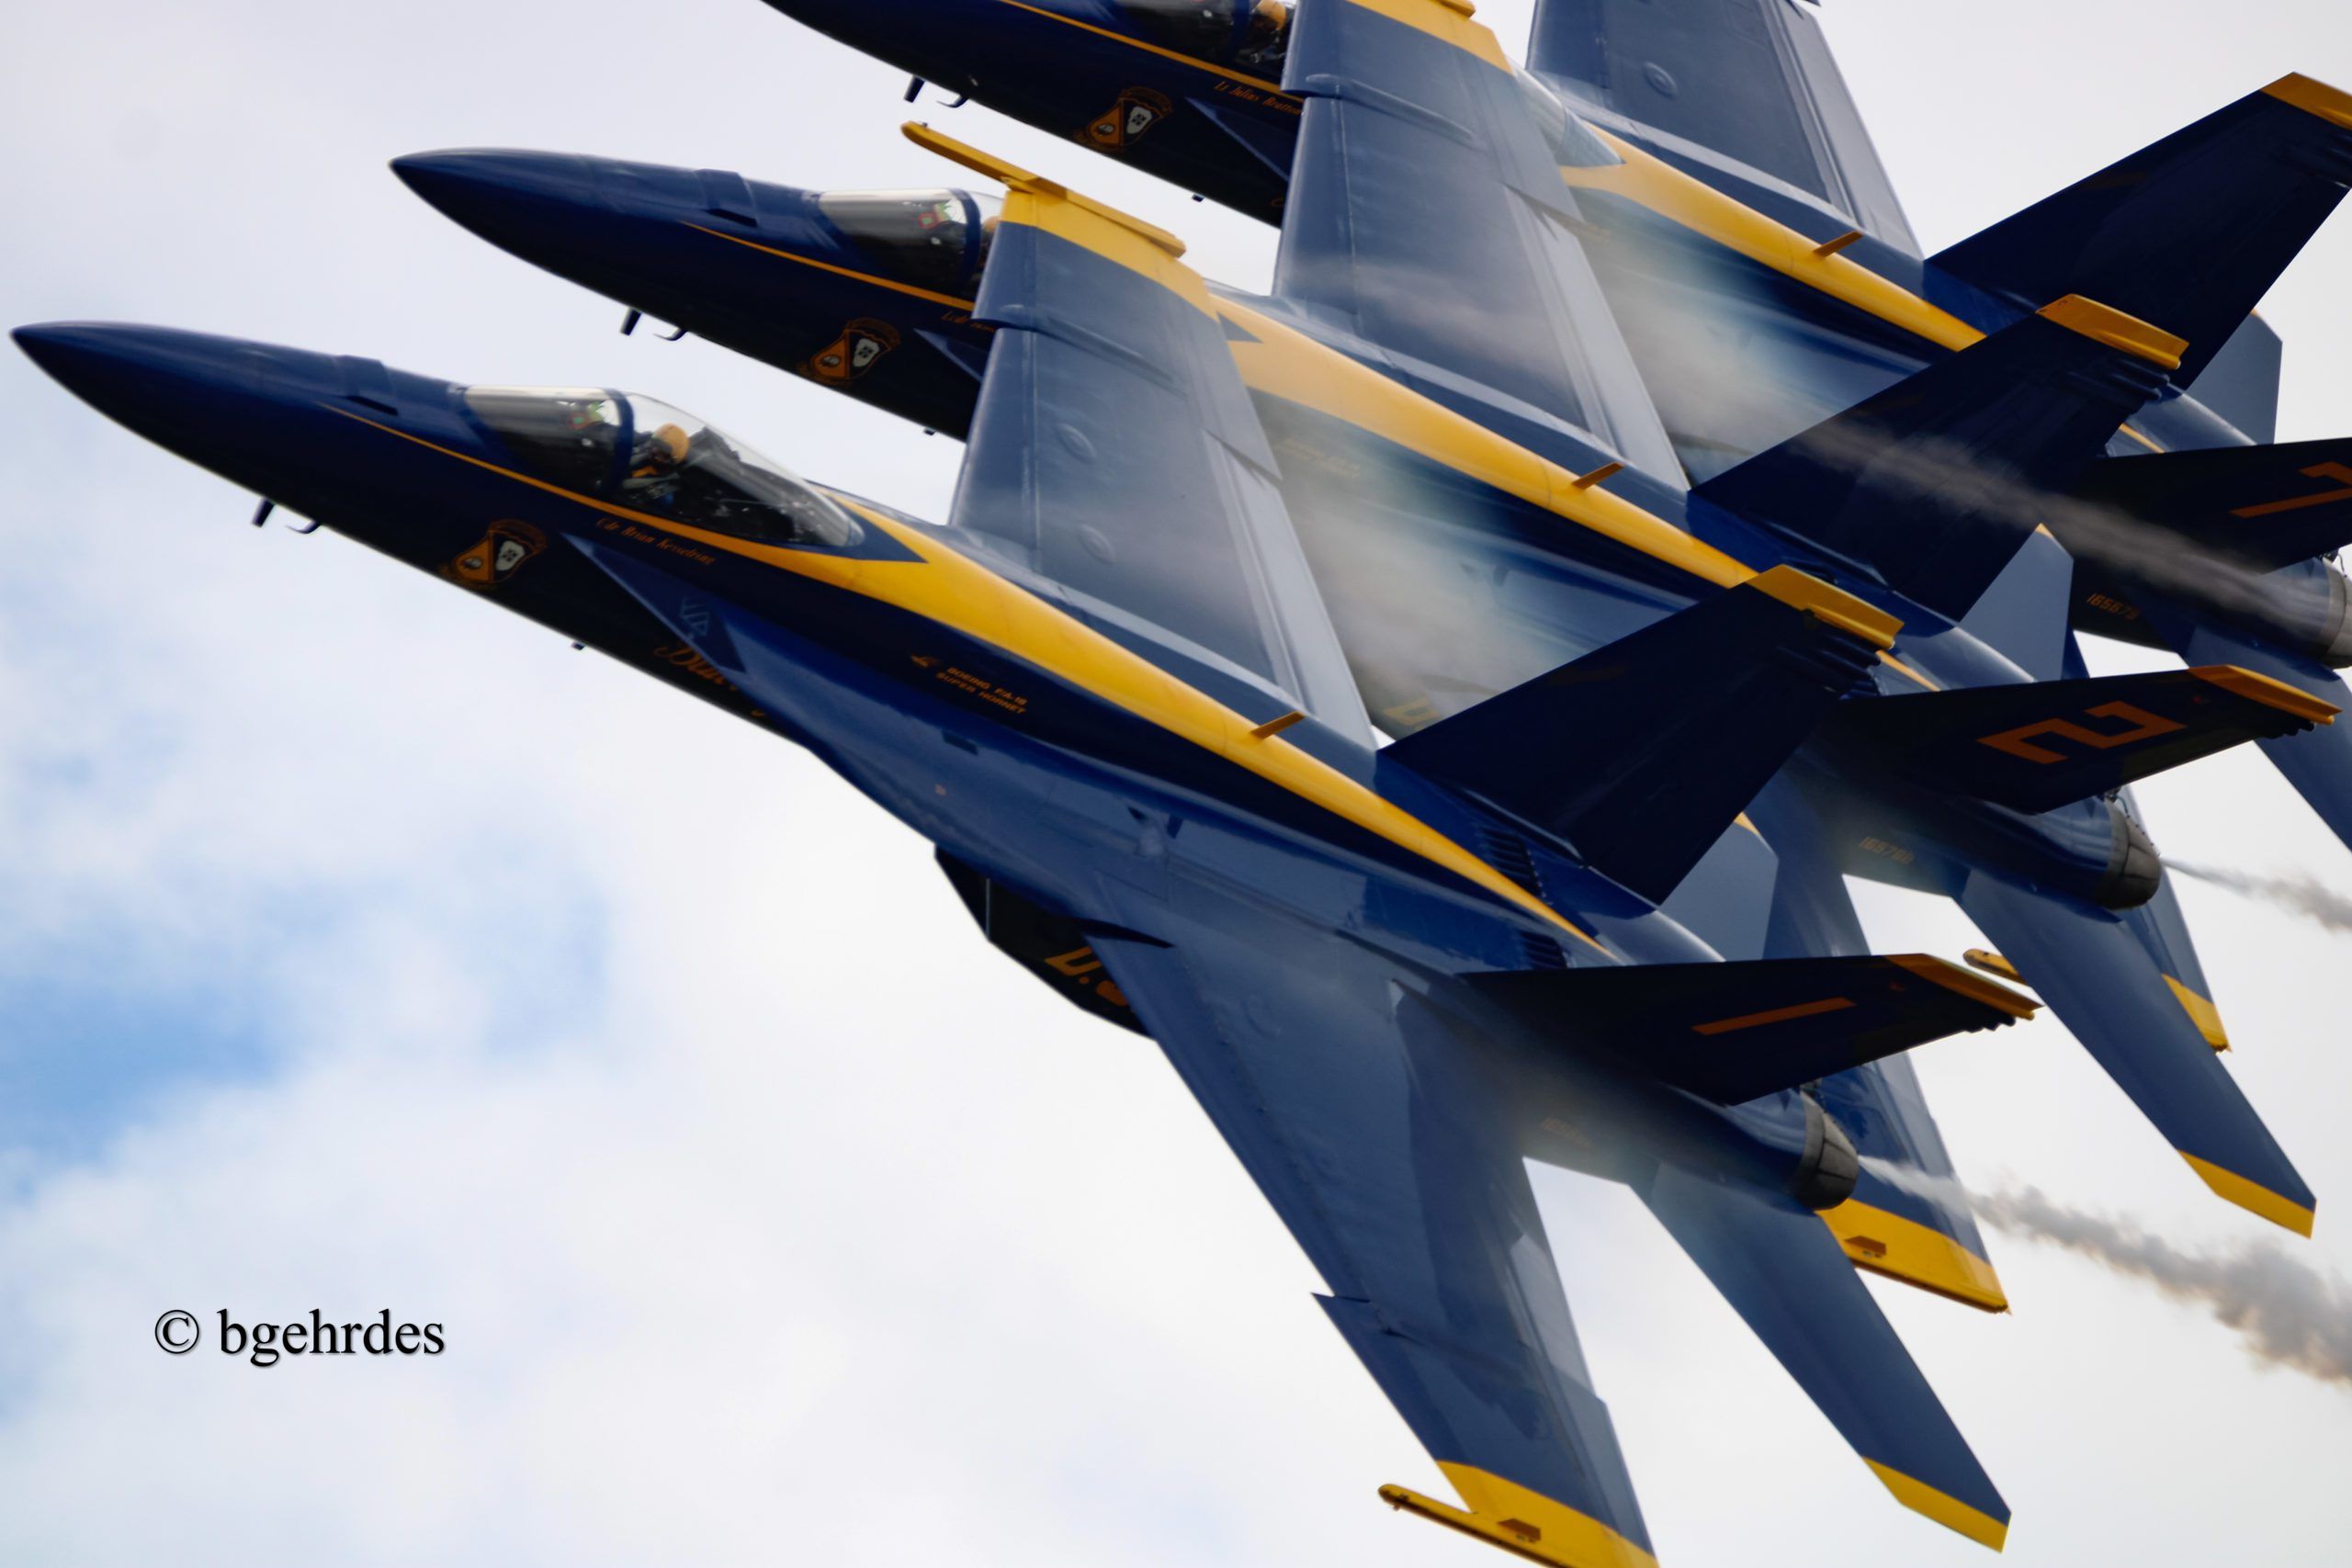 Today's Photo of the Day comes from Bethany Gehrdes, who took this photo during a recent Blue Angels practice session at NAS Pensacola.